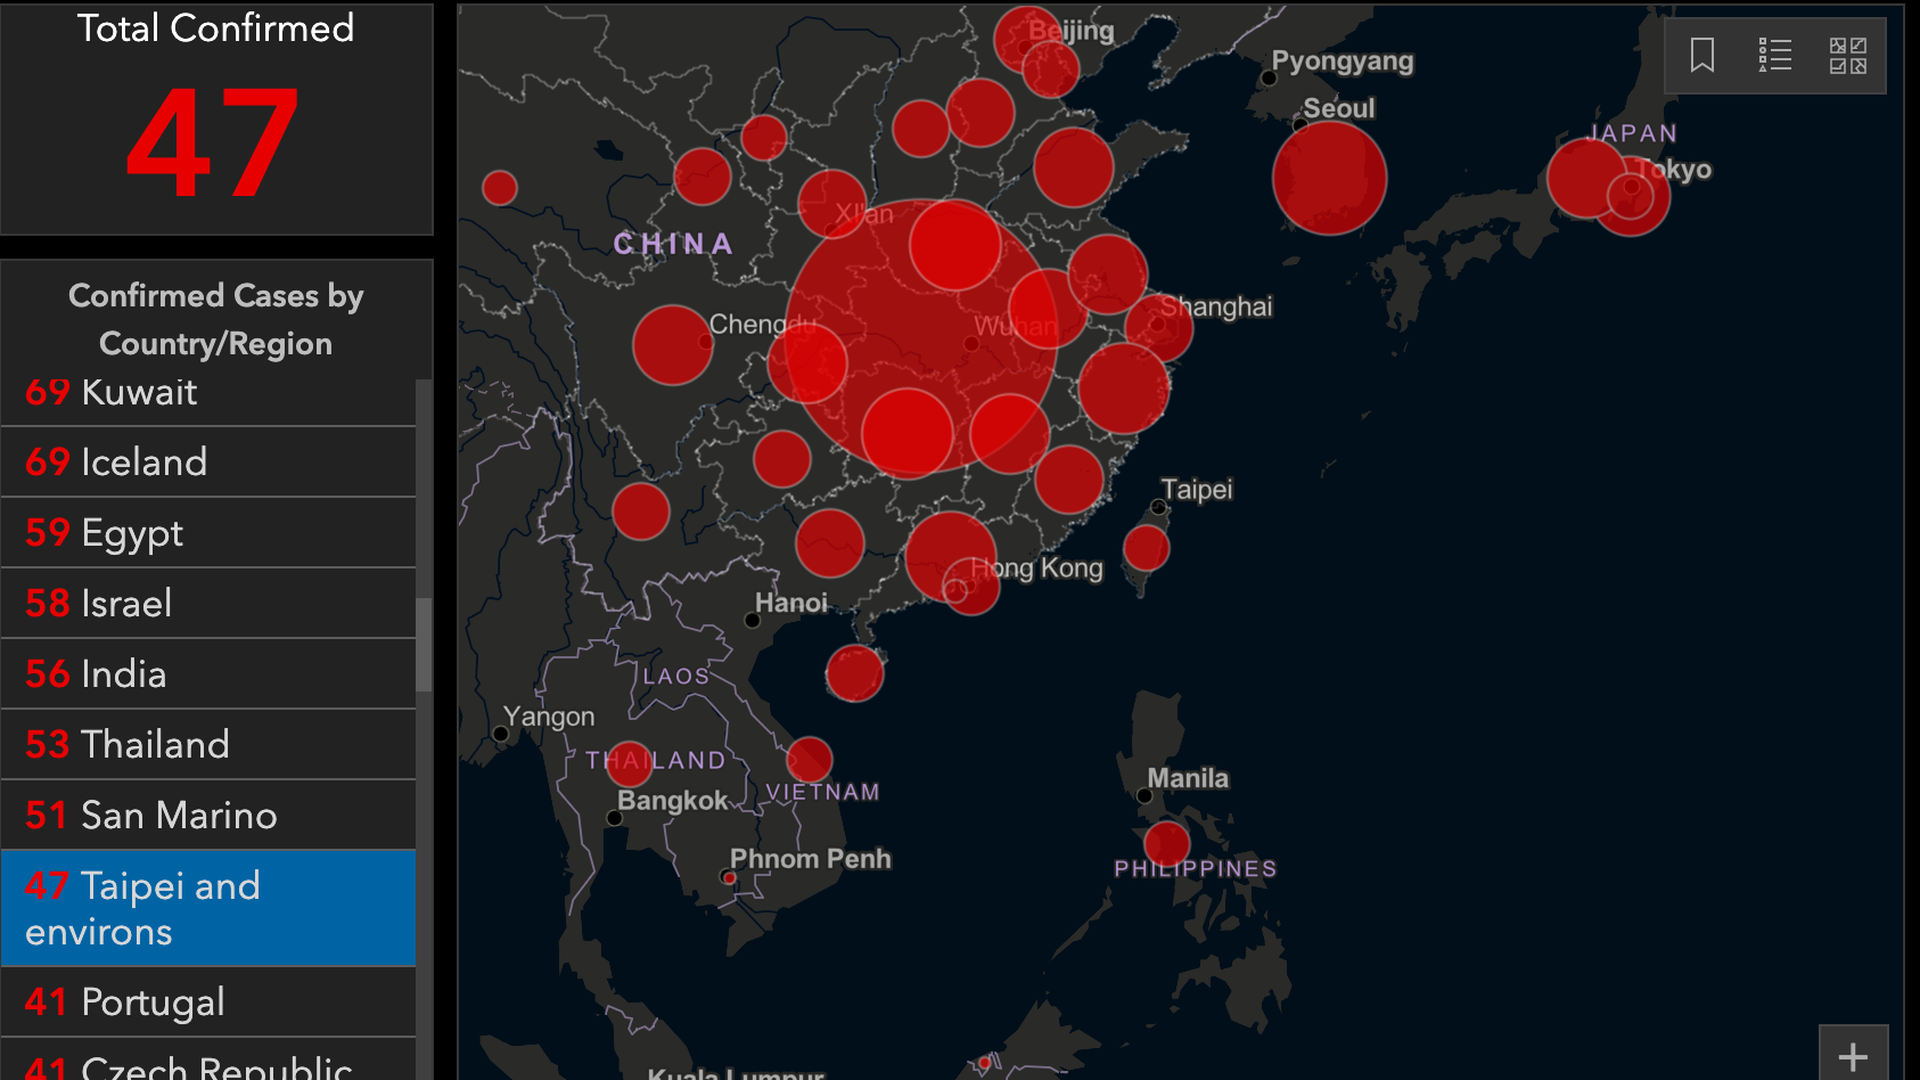 A heat map showing number of coronavirus cases in China, and in "Taipei and environs."